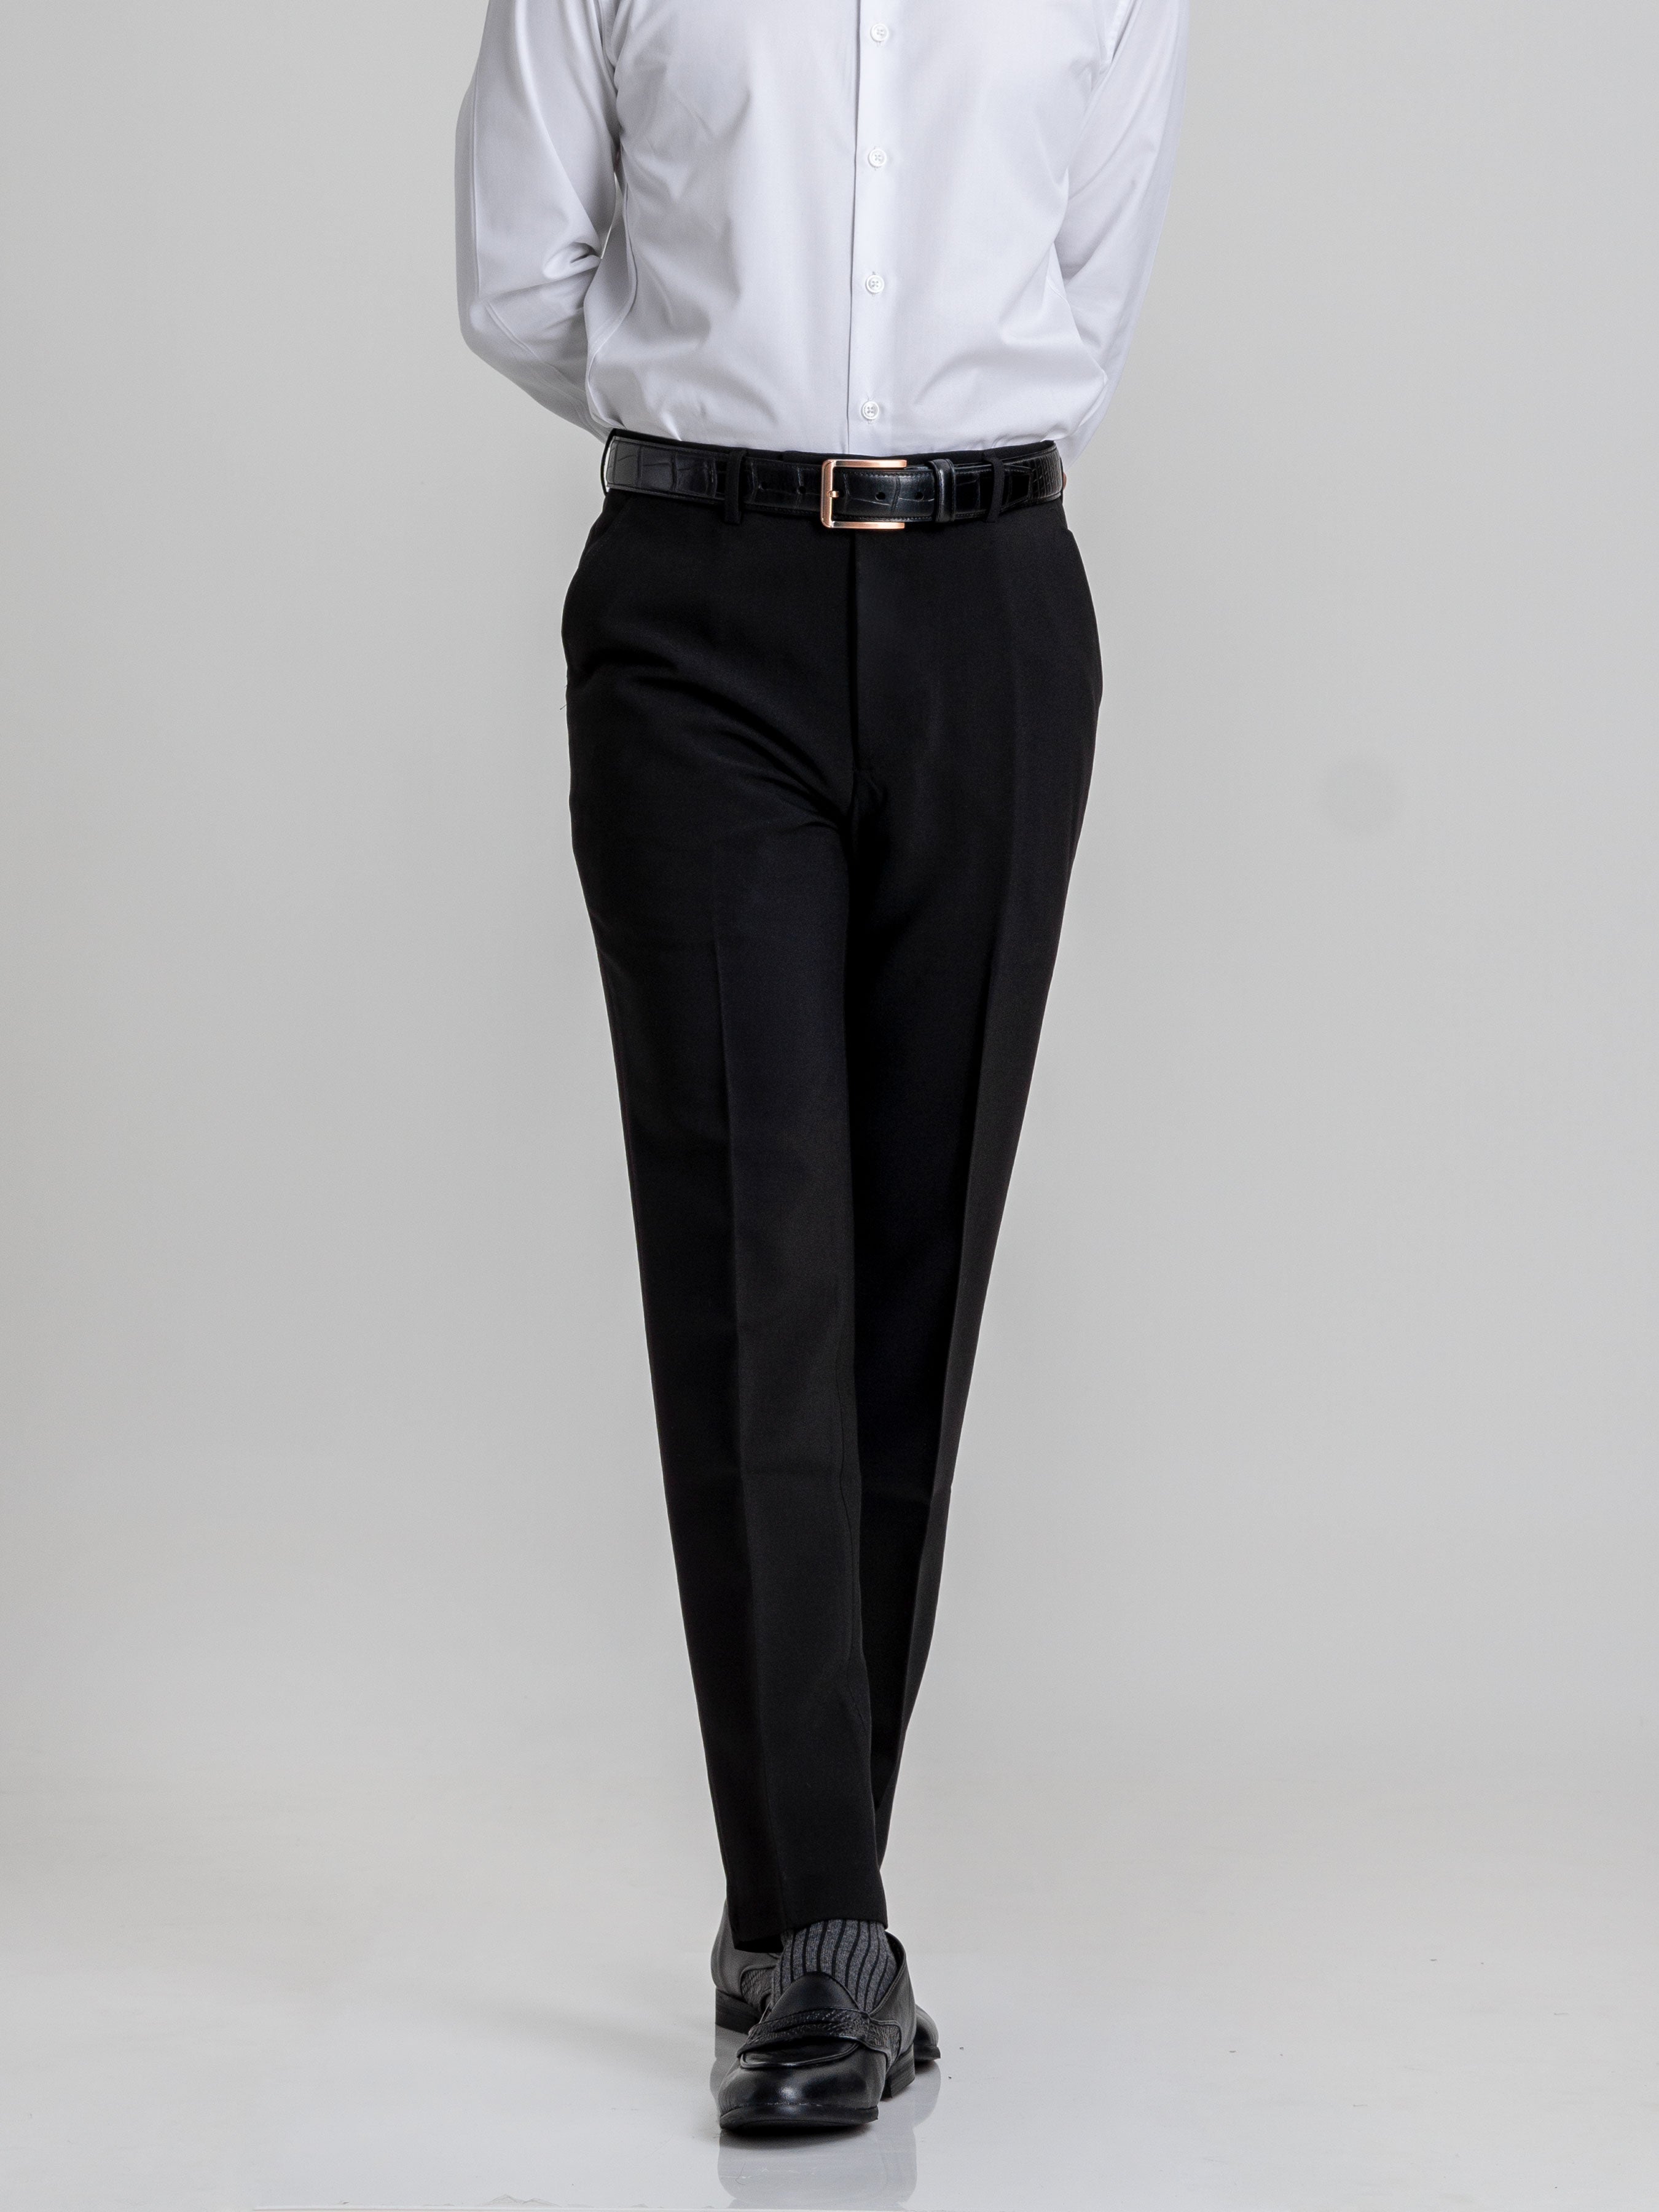 Trousers With Belt Loop -  Black Plain (Stretchable) - Zeve Shoes